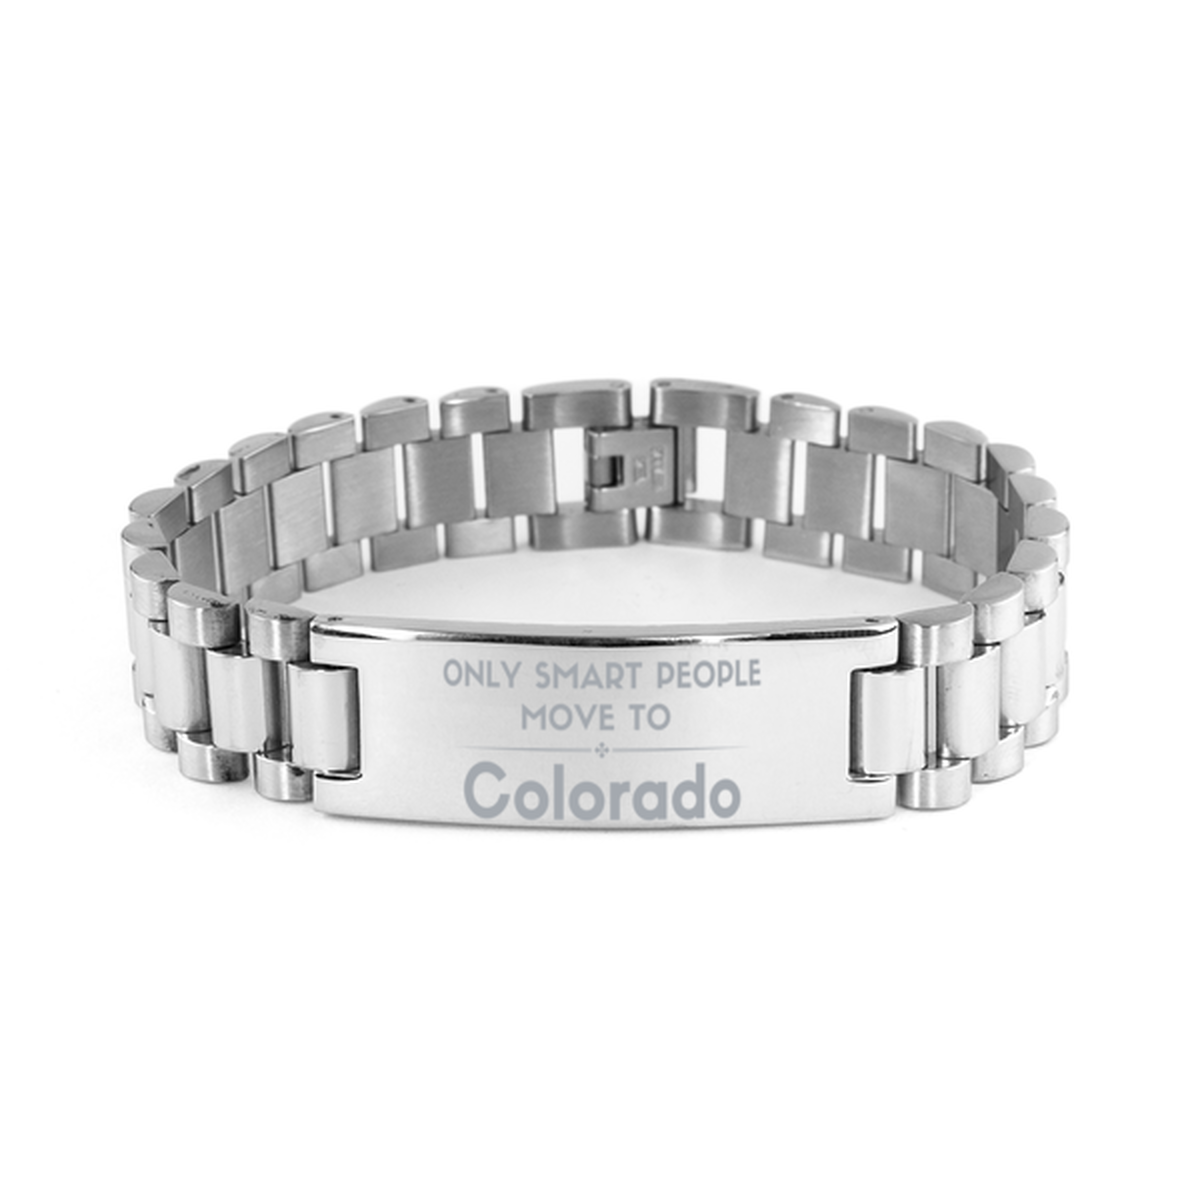 Only smart people move to Colorado Ladder Stainless Steel Bracelet, Gag Gifts For Colorado, Move to Colorado Gifts for Friends Coworker Funny Saying Quote